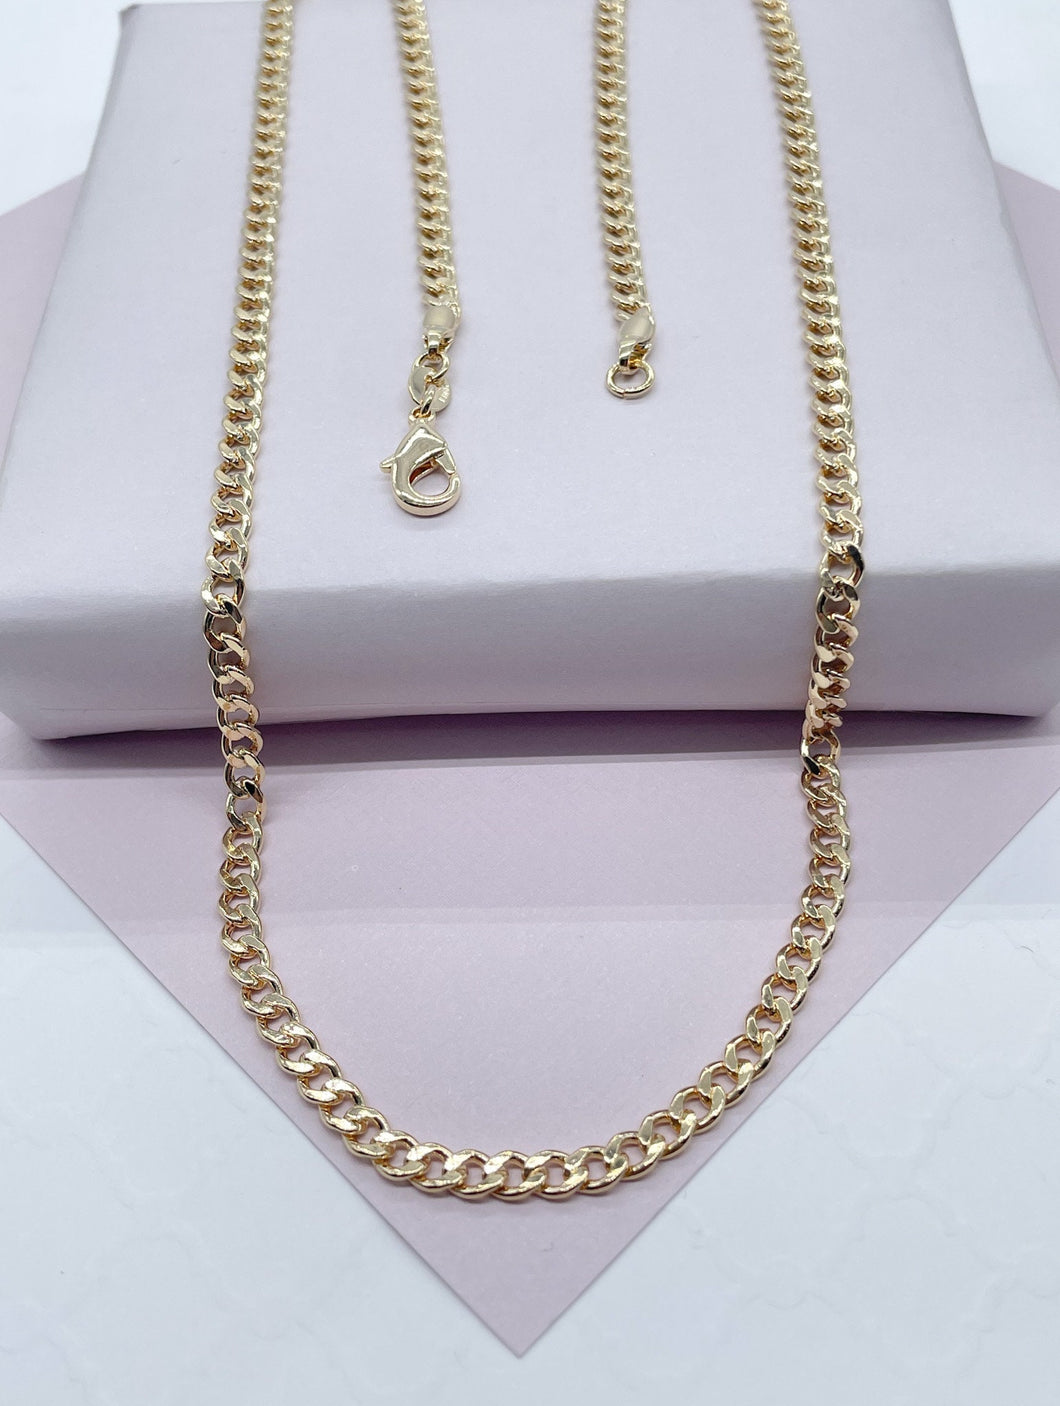 18k Gold Filled 4mm Cuban Link Chain Necklace, Curb Link Chain,   Supplies  Designers